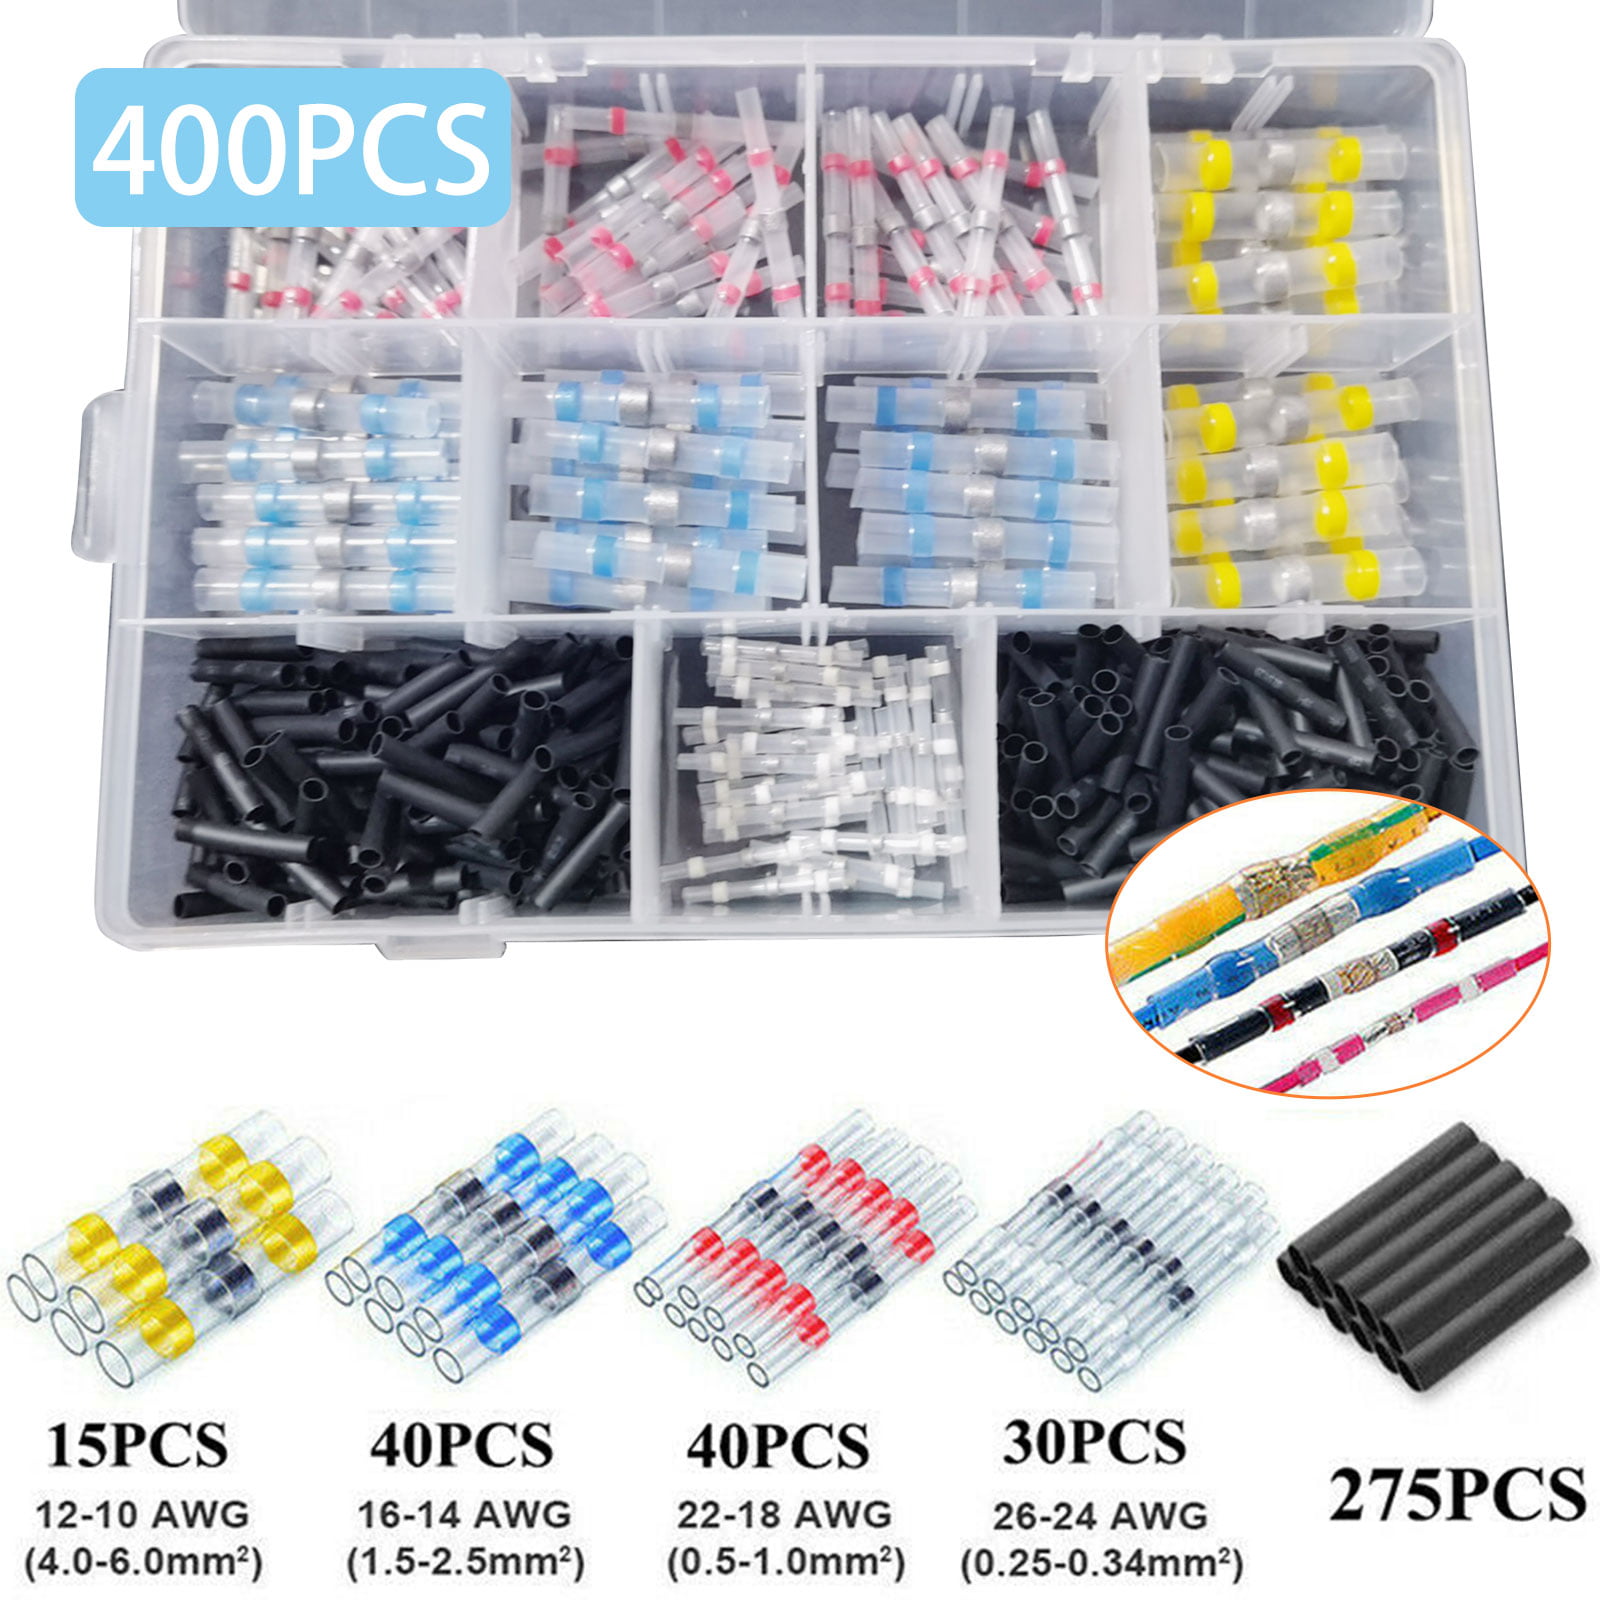 200pcs Solder Seal Sleeve Heat Shrink Butt Wire Connectors Terminals AWG 16-14 for sale online 